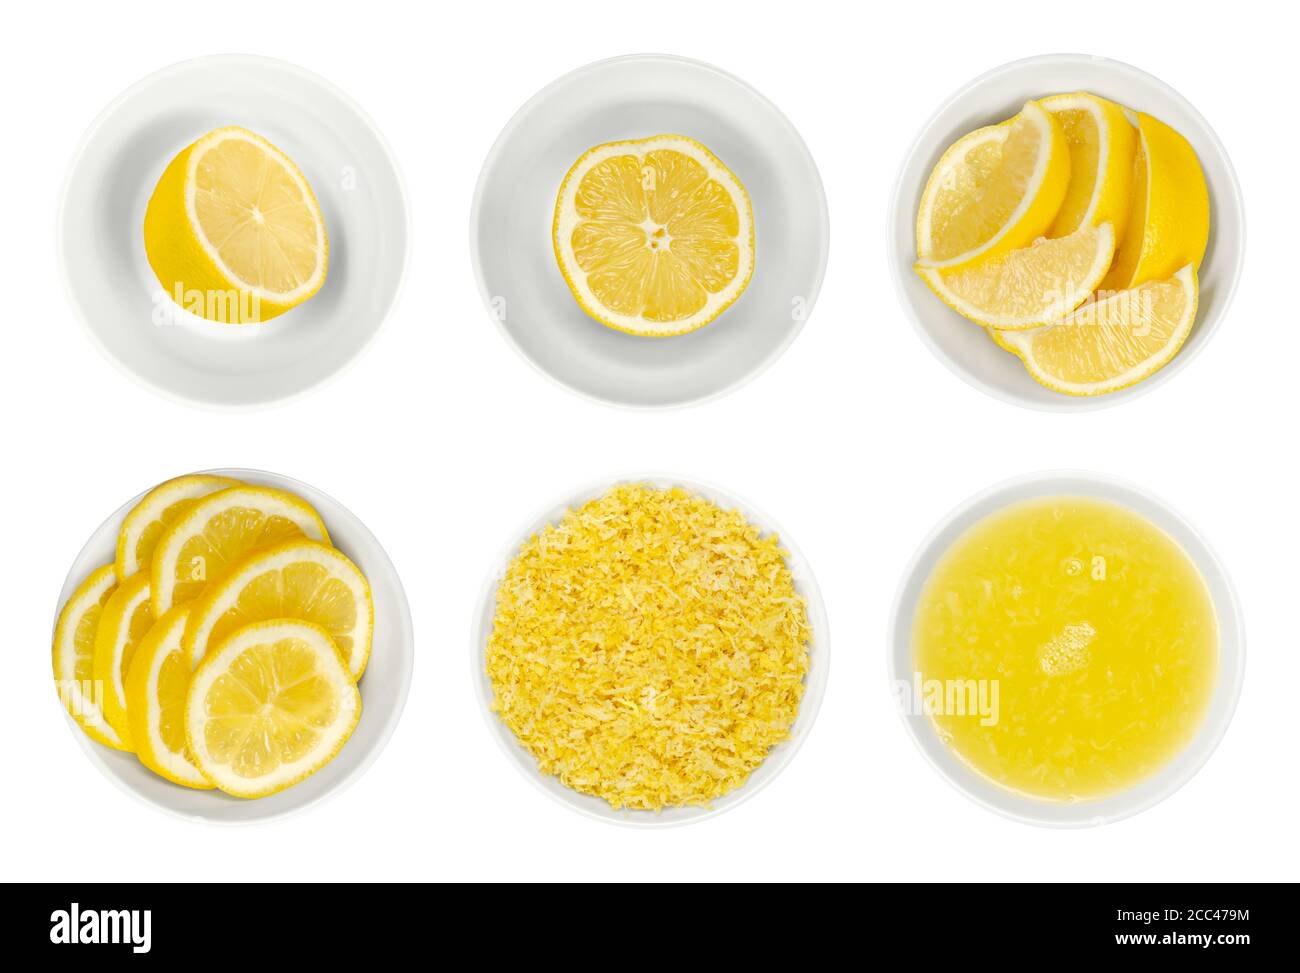 Fresh lemons, cut in half, slices and wedges, lemon zest and juice in white glass bowls. Ripe and yellow citrus fruits, used for culinary and cleaning Stock Photo